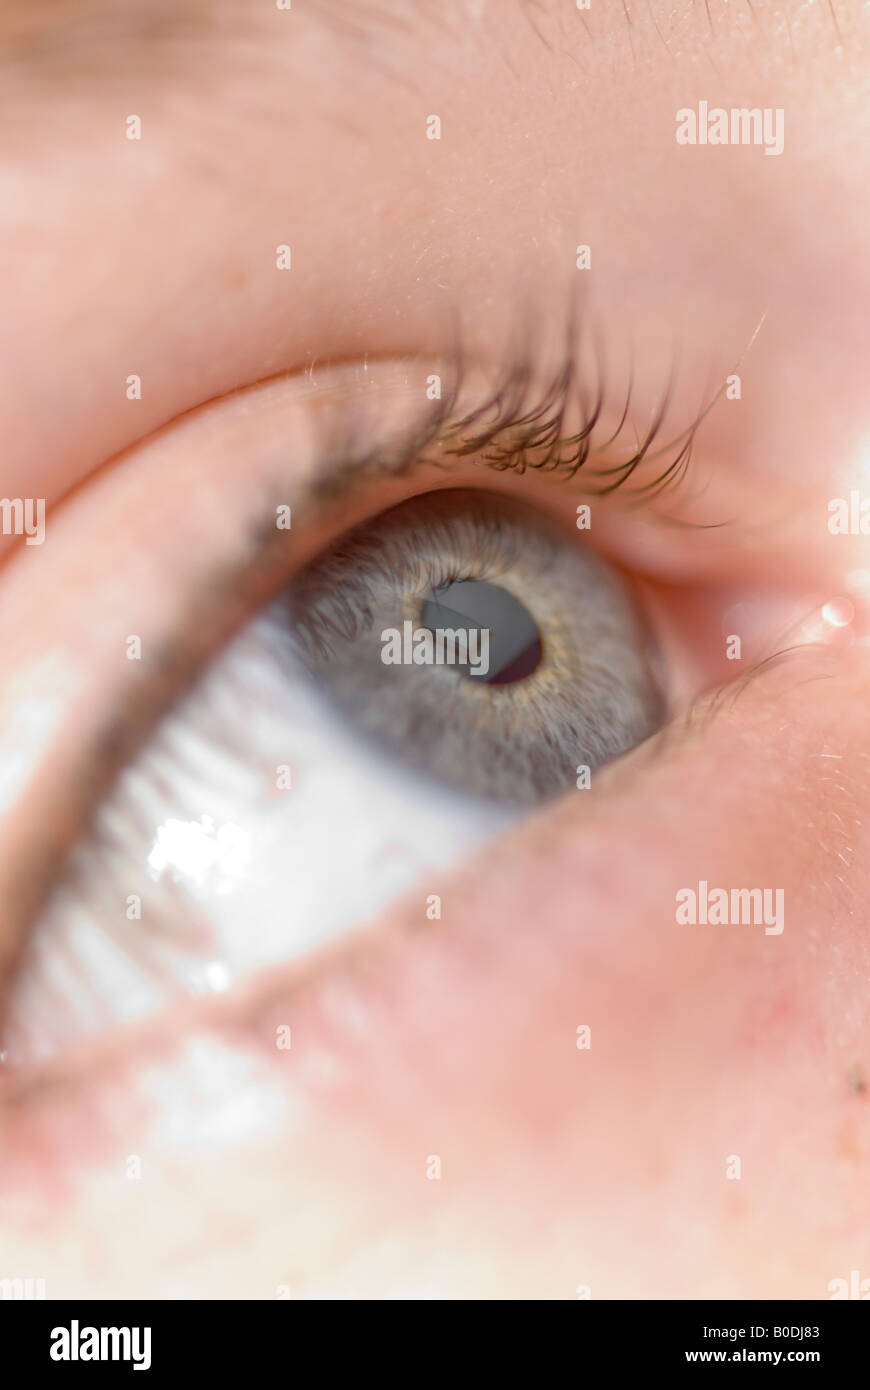 Close up of a 12 year old caucasian girl's eye Stock Photo